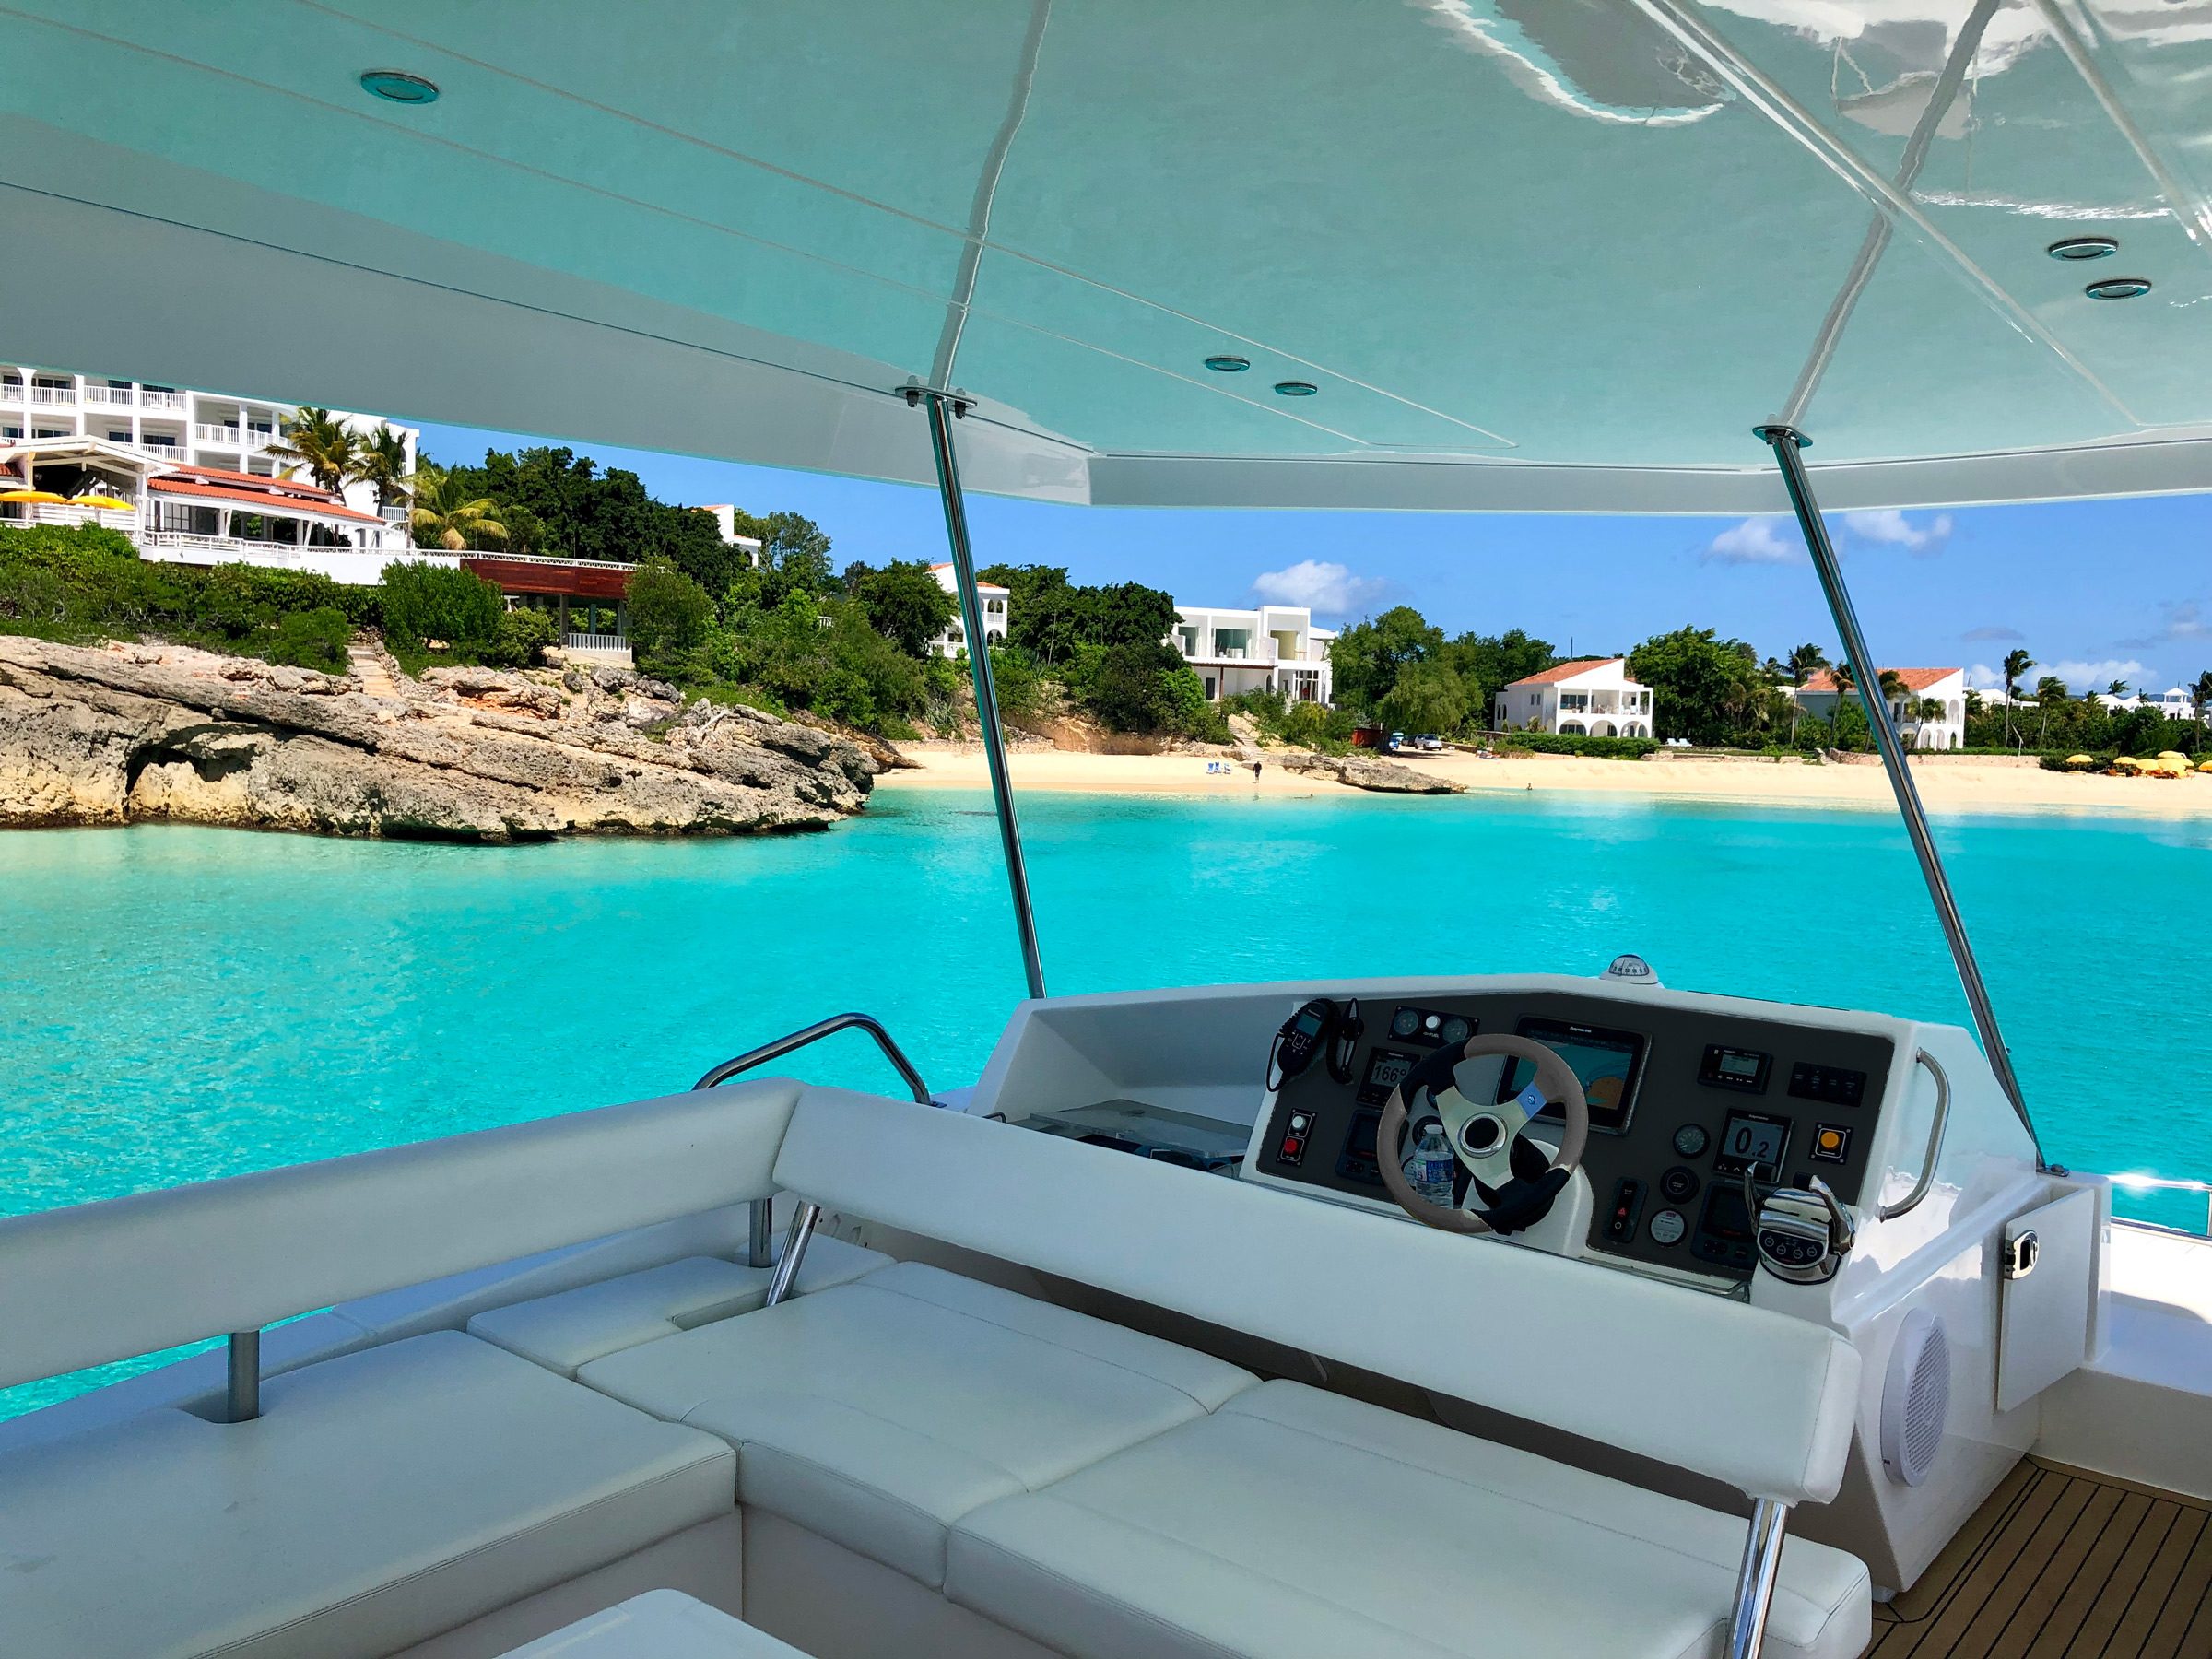 Meads Bay yacht charter